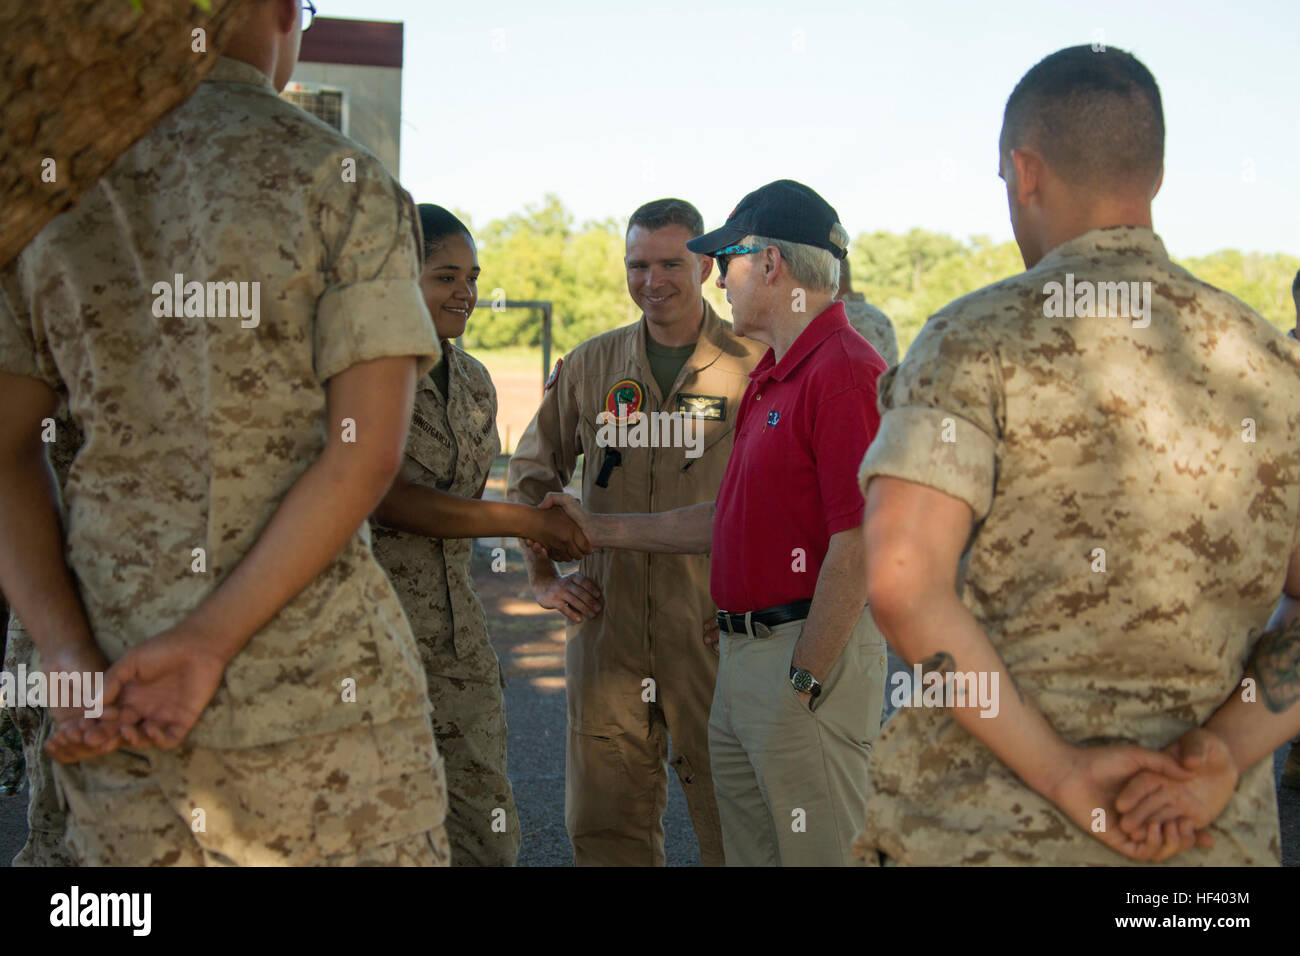 Ray Mabus, Secretary of the Navy, greets Marines of Marine Rotational Force – Darwin’s Aviation Combat Element at Royal Australian Air Force Base Darwin, Northern Territory, Australia, May 14, 2016. Mabus came to Darwin to visit the Marines and Sailors of MRF-D and observe live-fire ranges.  (U.S. Marine Corps photo by Cpl. Carlos Cruz Jr./Released) MRF-D 2016, SECNAV visits Marines in the Top End 160514-M-KE800-049 Stock Photo